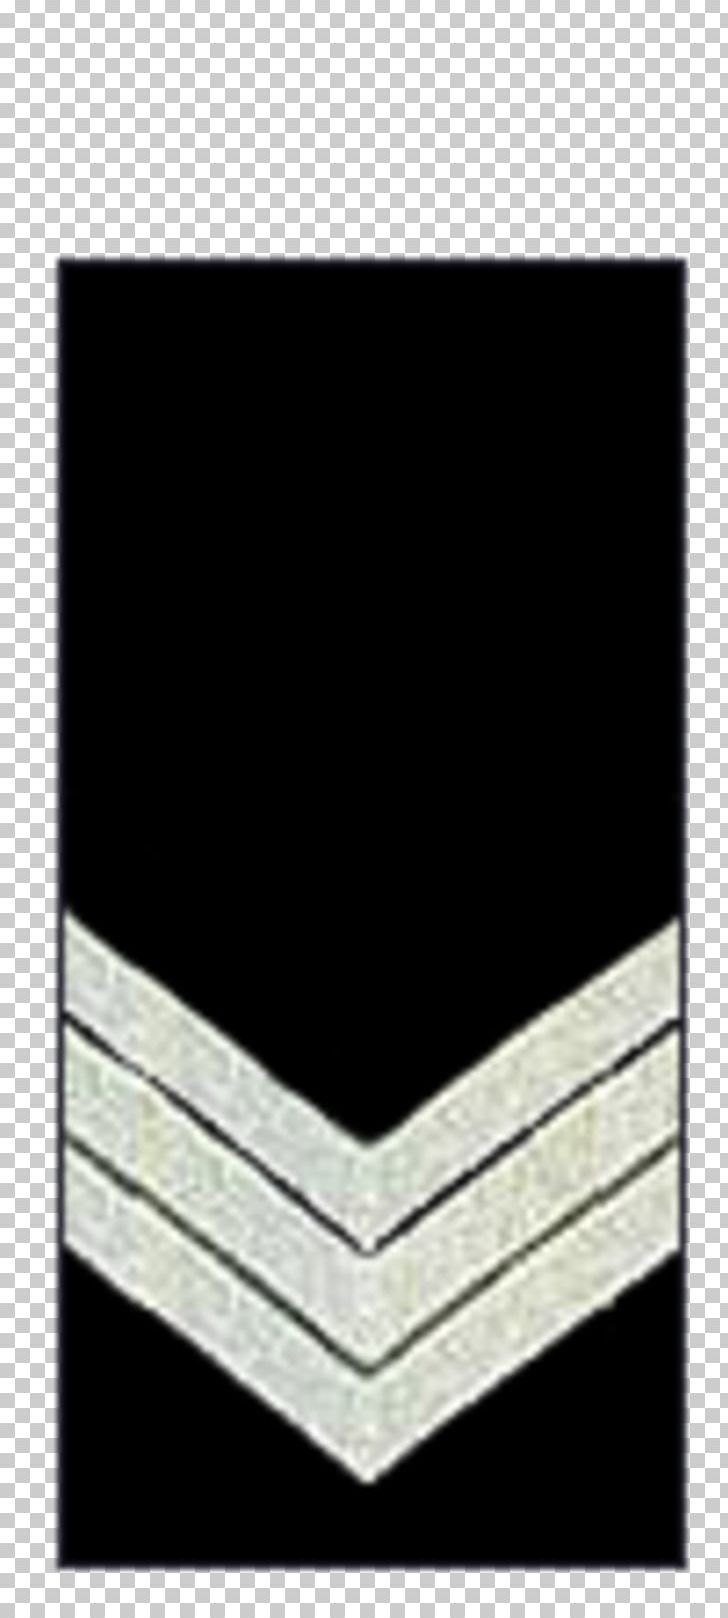 Chief Master Sergeant Of The Air Force Gunnery Sergeant Police Military Rank PNG, Clipart, Angle, Army Officer, Australian, Black, Brand Free PNG Download